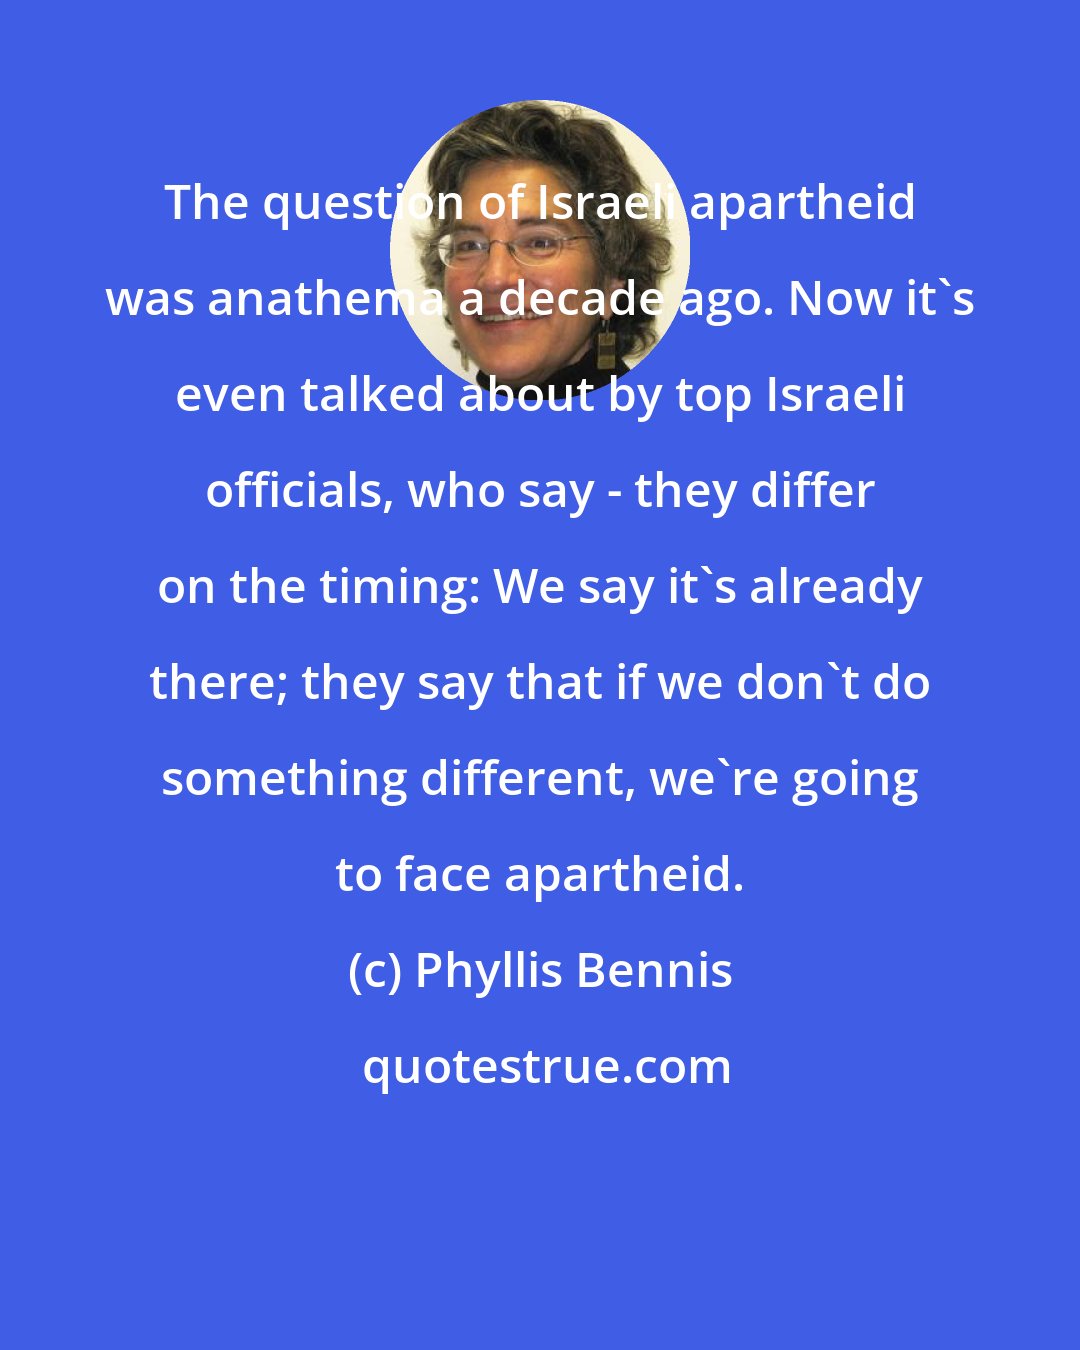 Phyllis Bennis: The question of Israeli apartheid was anathema a decade ago. Now it's even talked about by top Israeli officials, who say - they differ on the timing: We say it's already there; they say that if we don't do something different, we're going to face apartheid.